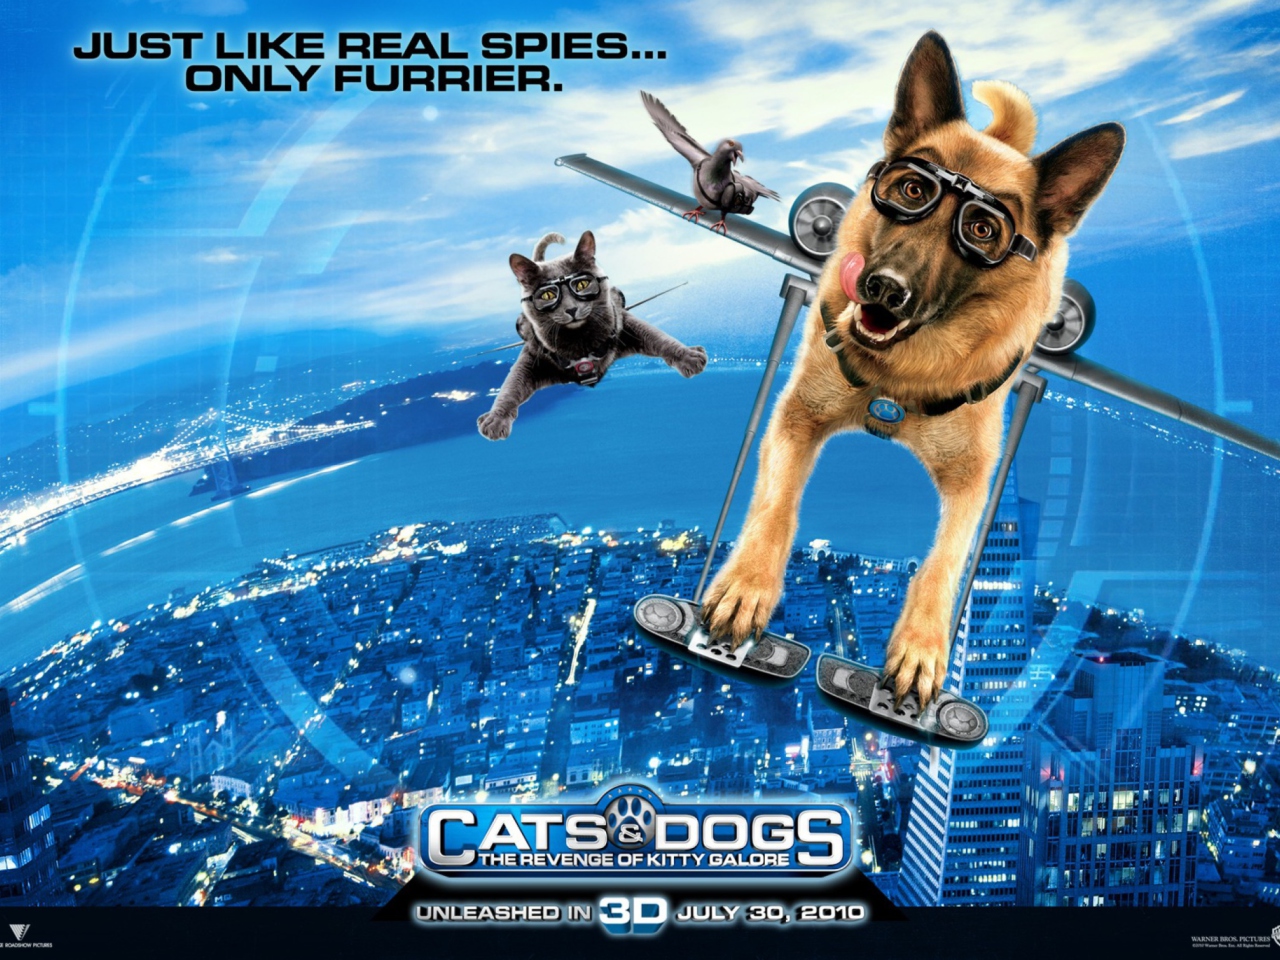 Cats & Dogs: The Revenge of Kitty Galore wallpaper 1280x960